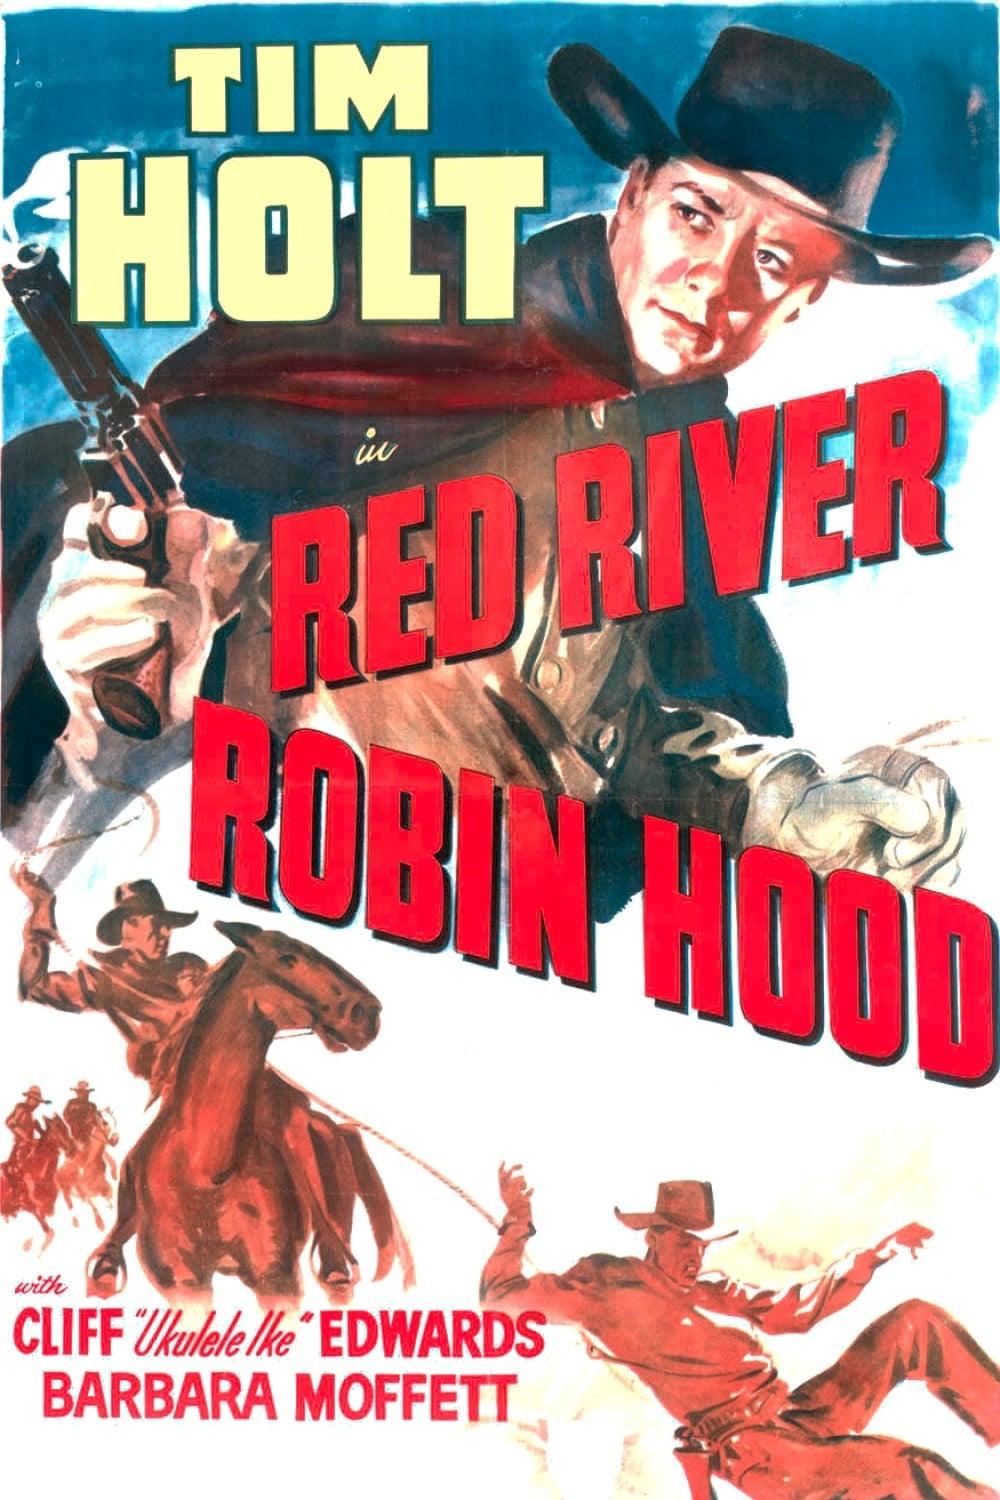 Red River Robin Hood poster